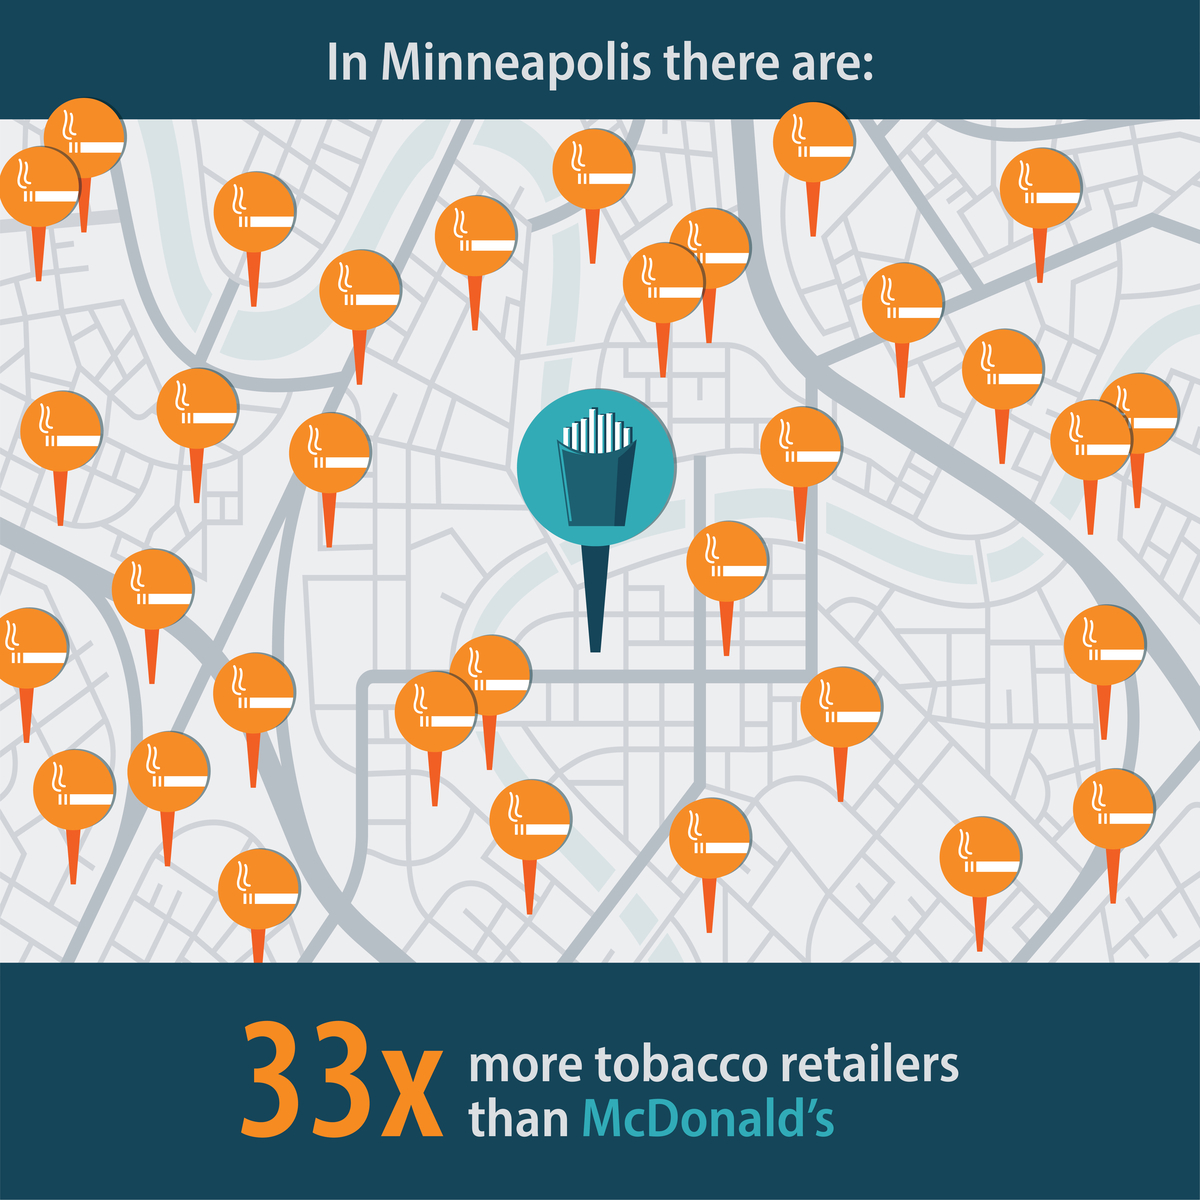 In Minneapolis there are: 33 times more tobacco retailers than McDonald's